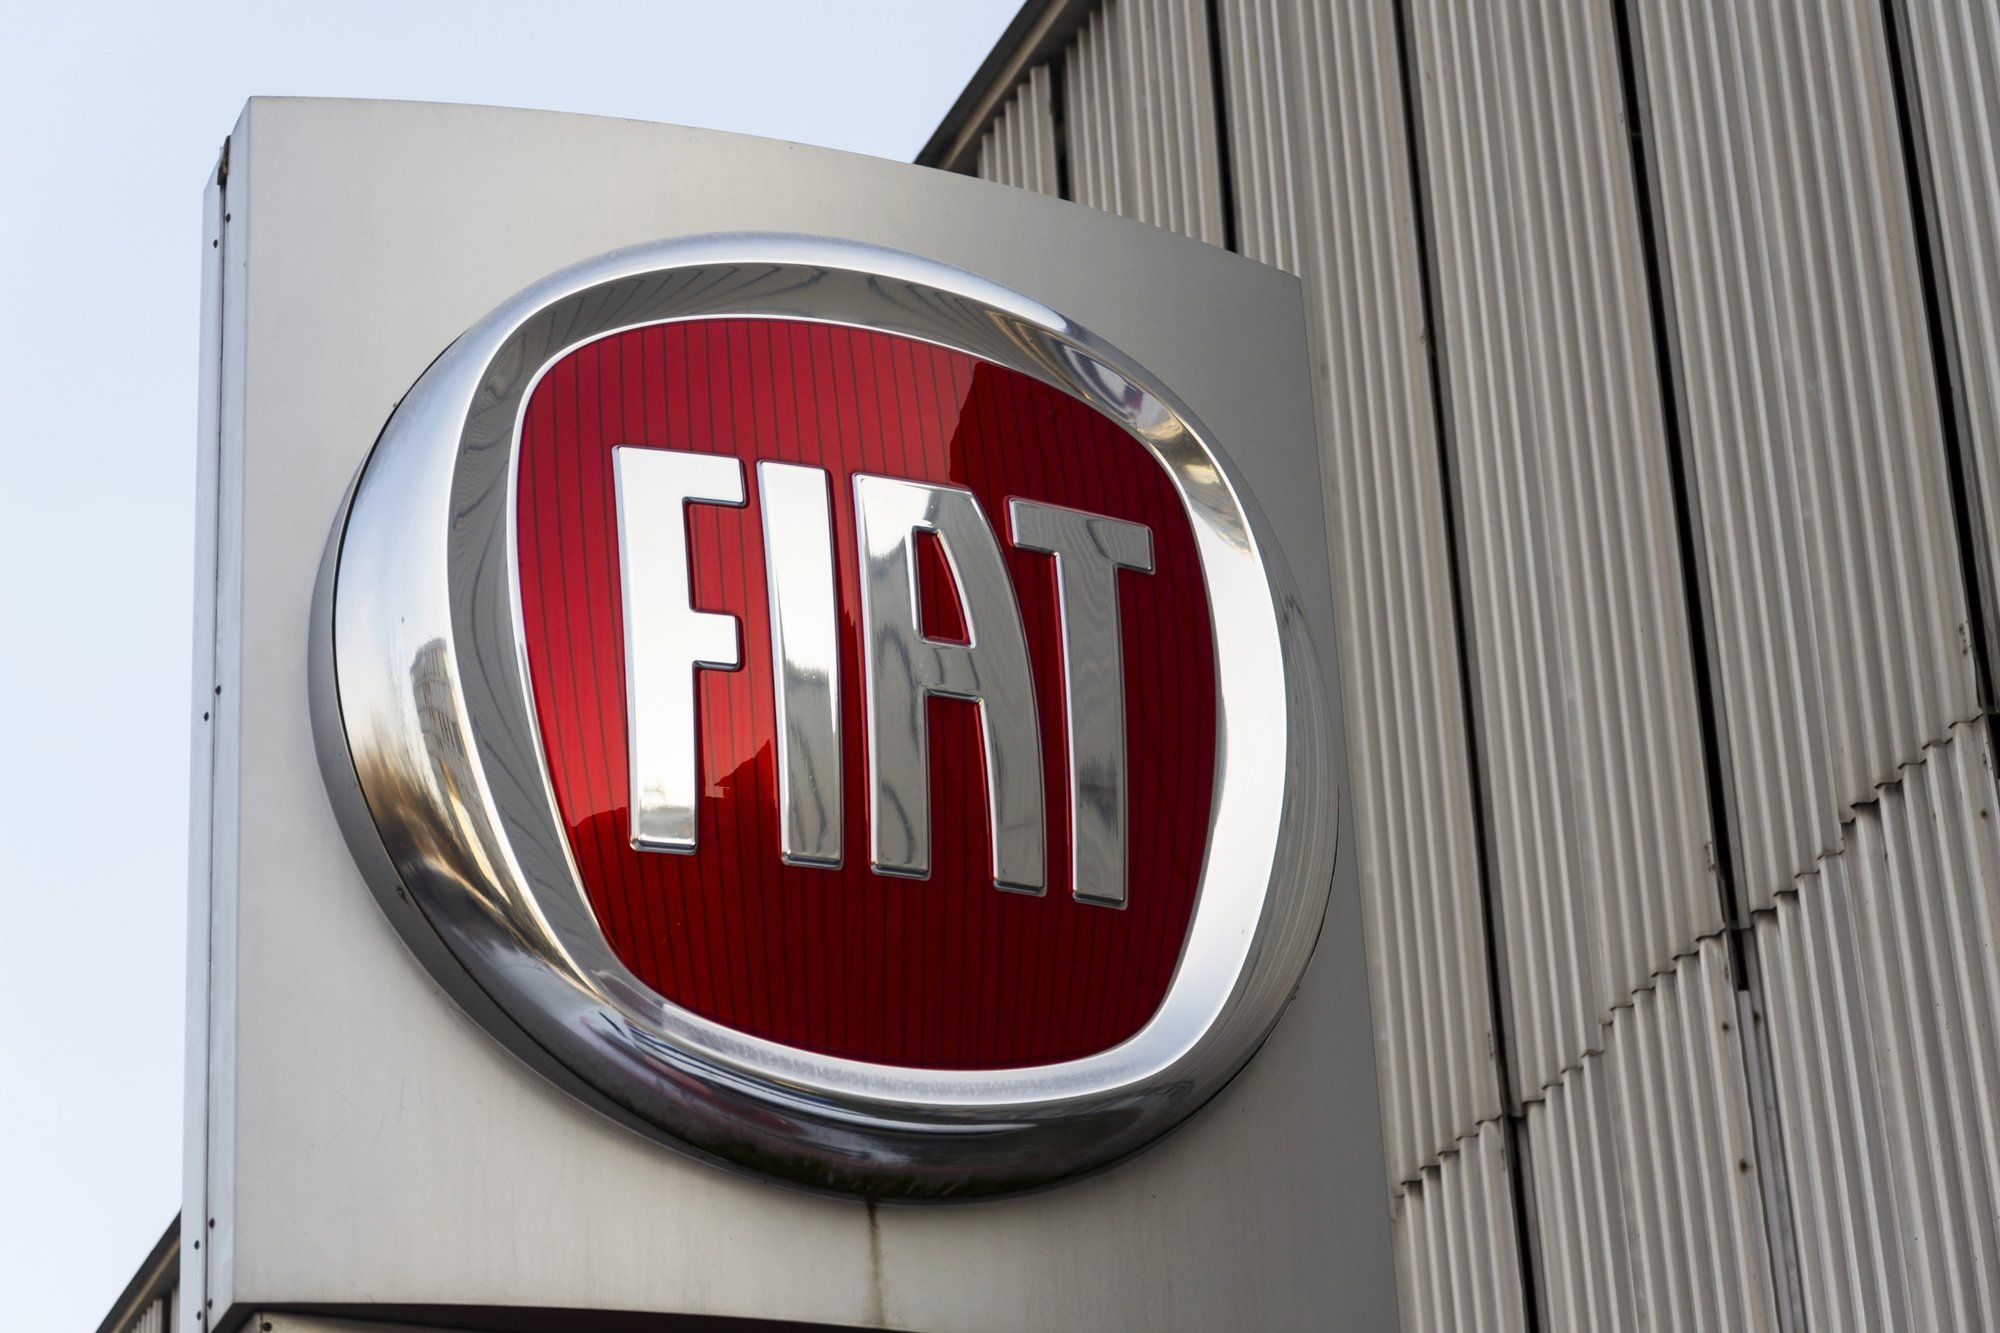 Fiat sign regarding the FCA class action lawsuit filed 